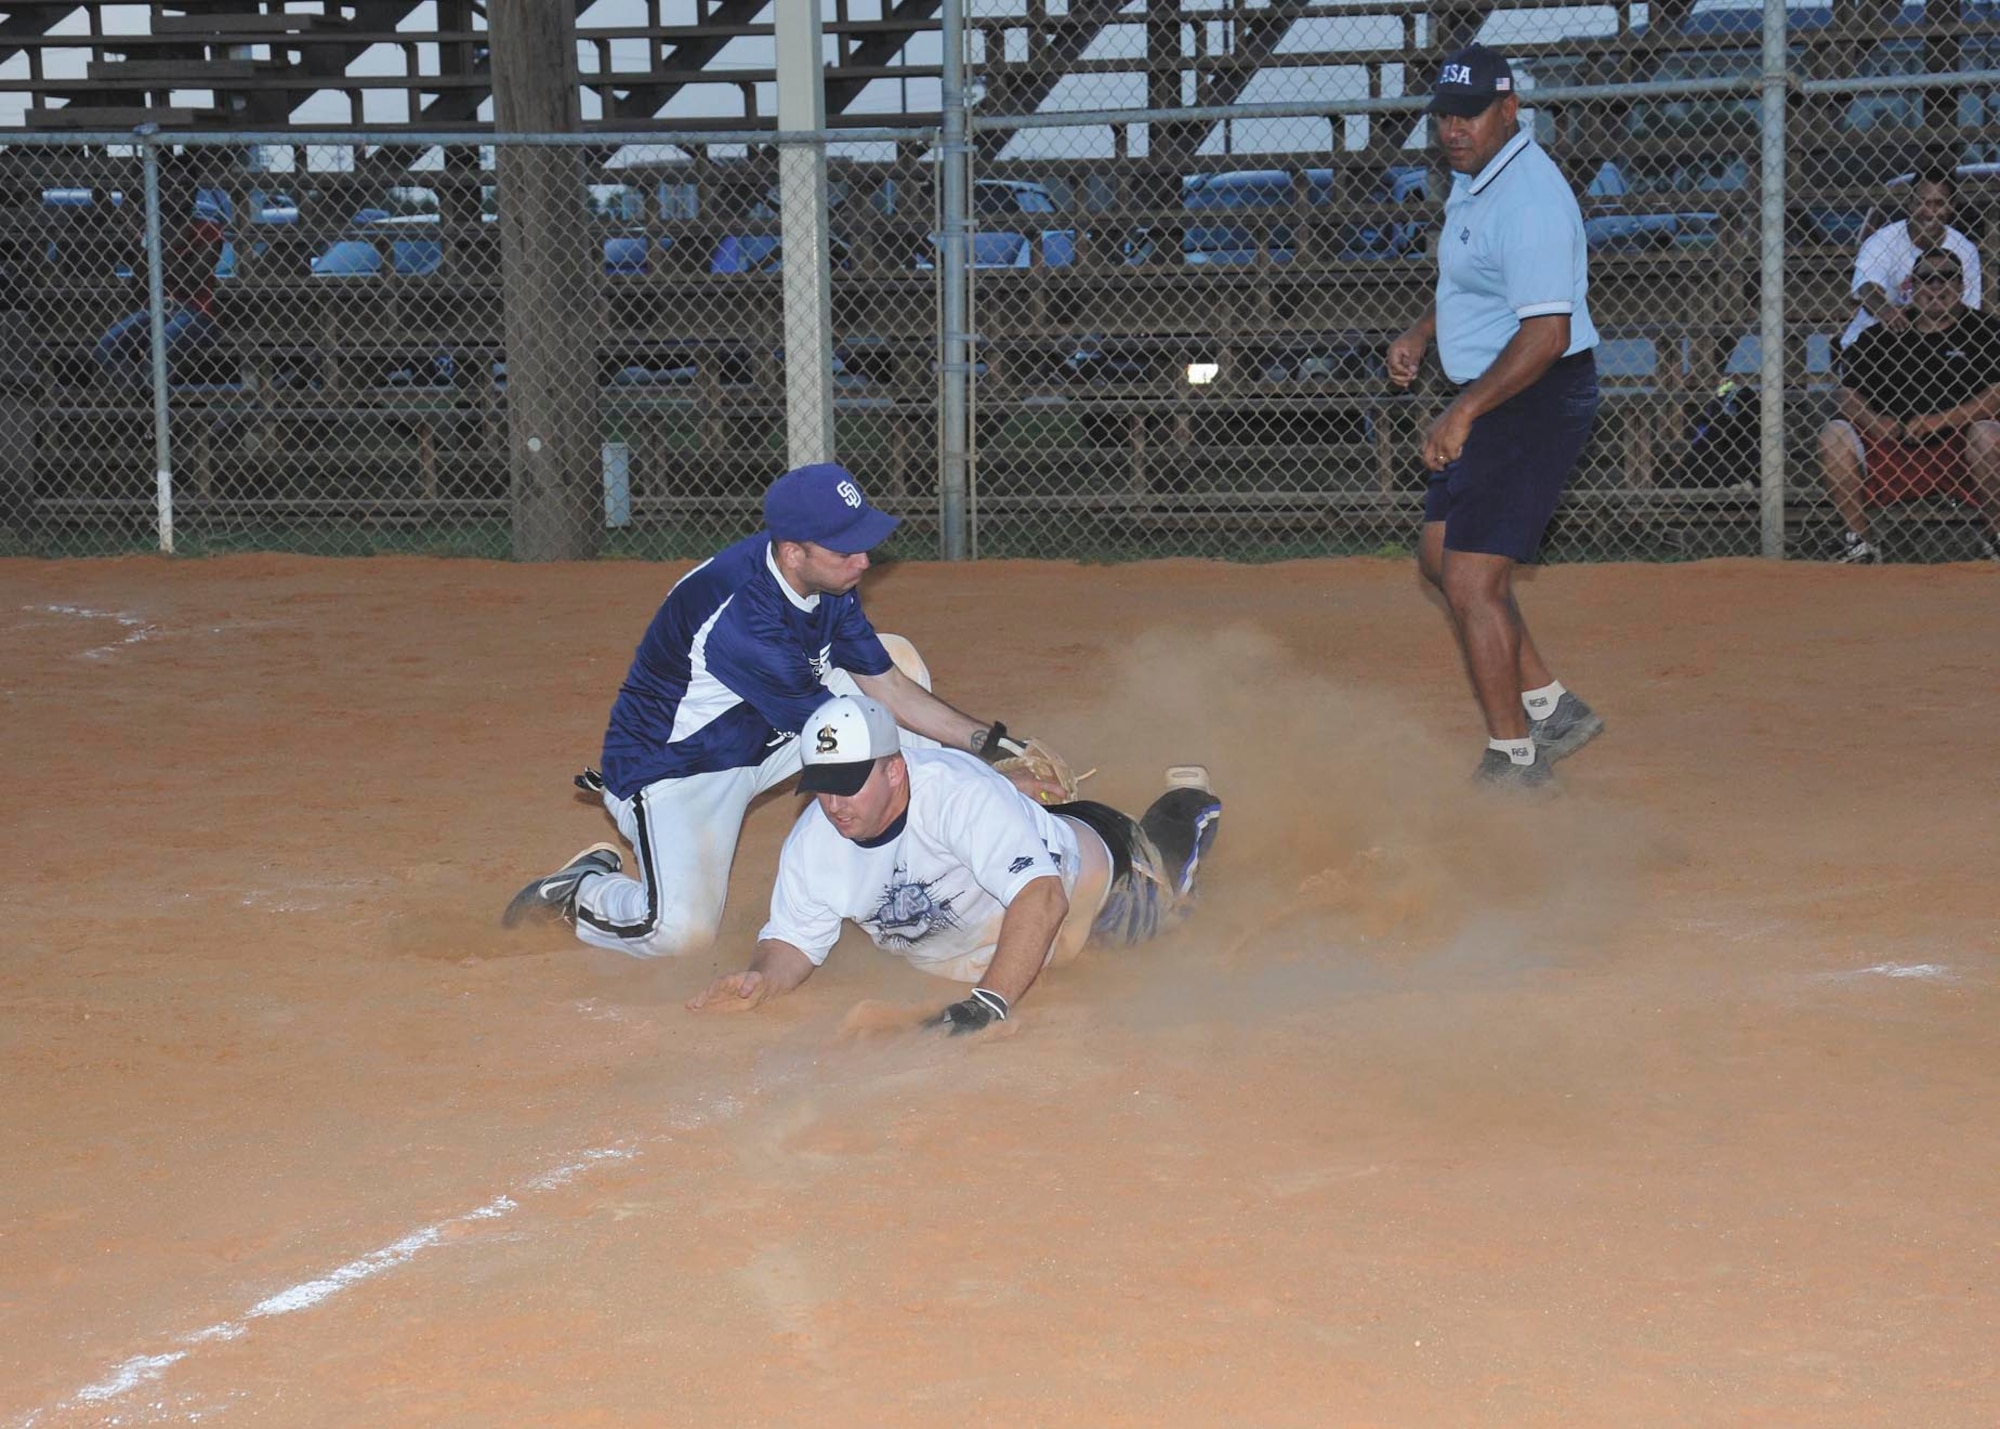 Navy Information Operations Command-Texas base runner Ross Beebe slides under the tag as 343rd Training Squadron catcher James Bice tries to take him out at home July 26 during the Joint Base San Antonio-Lackland intramural softball tournament championship game. Home plate umpire Jesse Jenkins called Beebe safe. NIOC-Texas, and the 343rd TRS will join the 802nd Force Support Squadron and the 624th Operations Center at the all-JBSA intramural softball tournament, which begins Monday at JBSA-Randolph. (U.S. Air Force photo/Alan Boedeker)